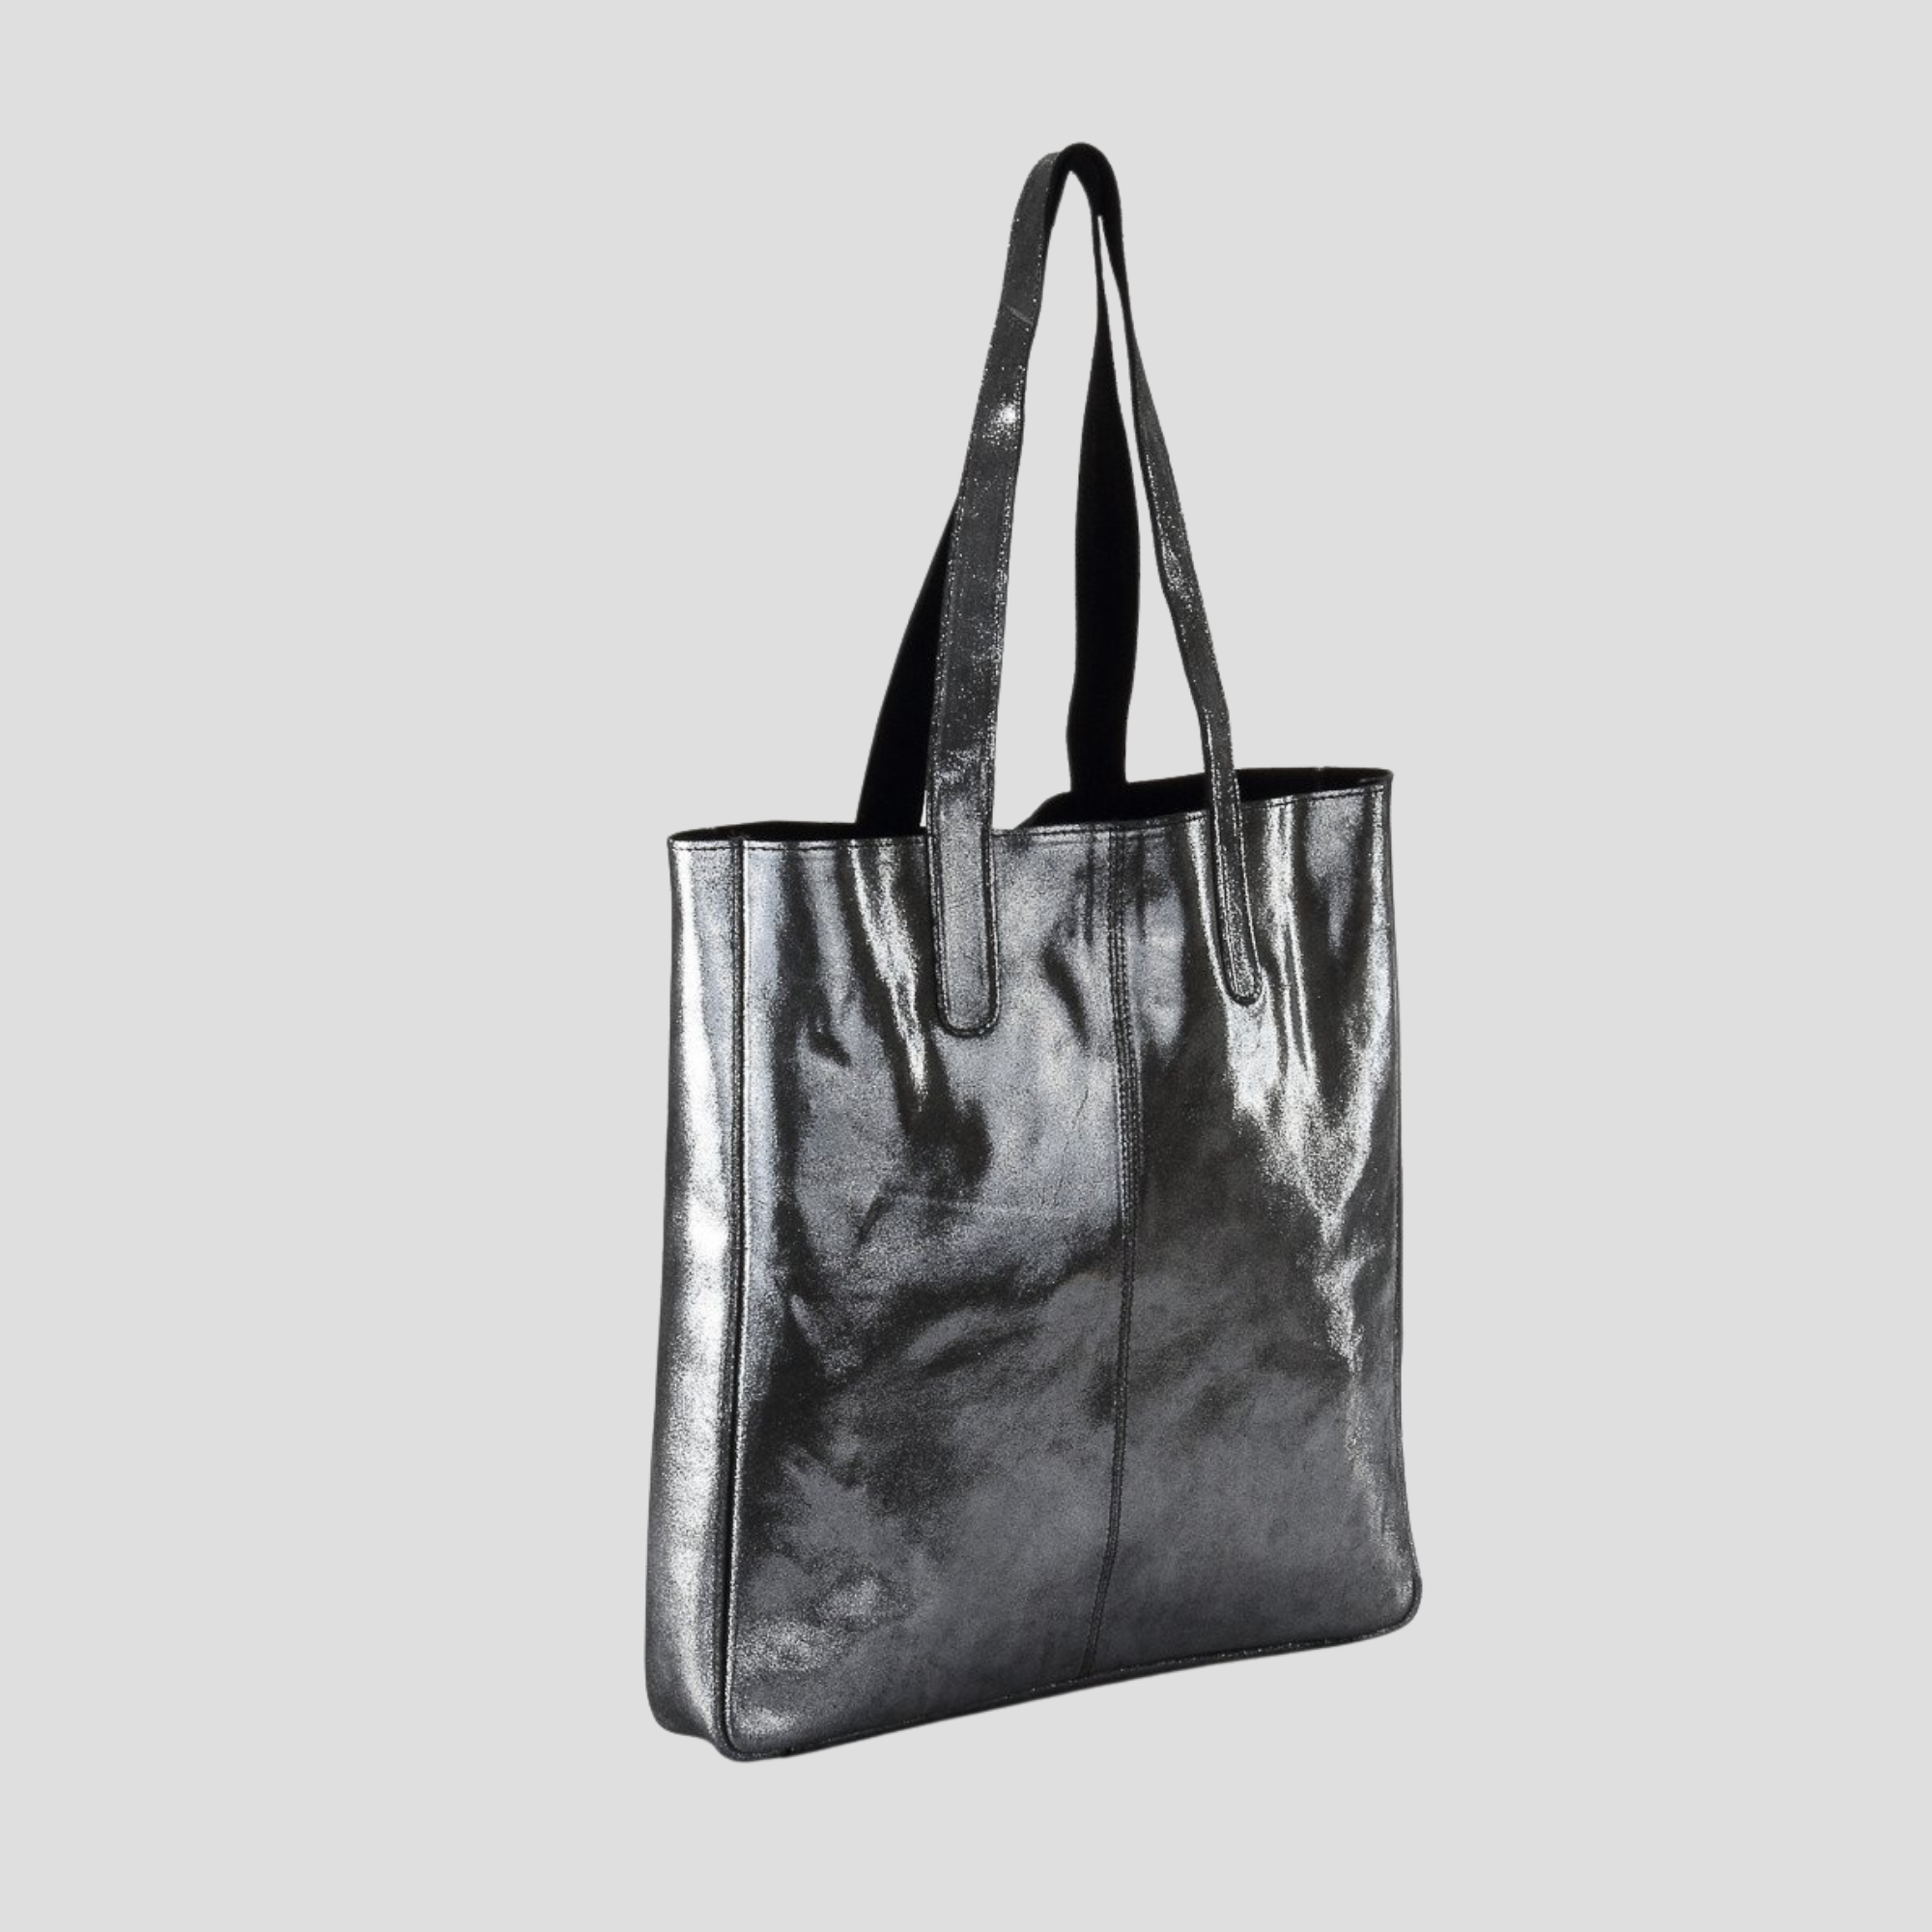 HYDESTYLE METALLIC SOFIA REVERSIBLE LEATHER TOTE BAG l Variety of colours